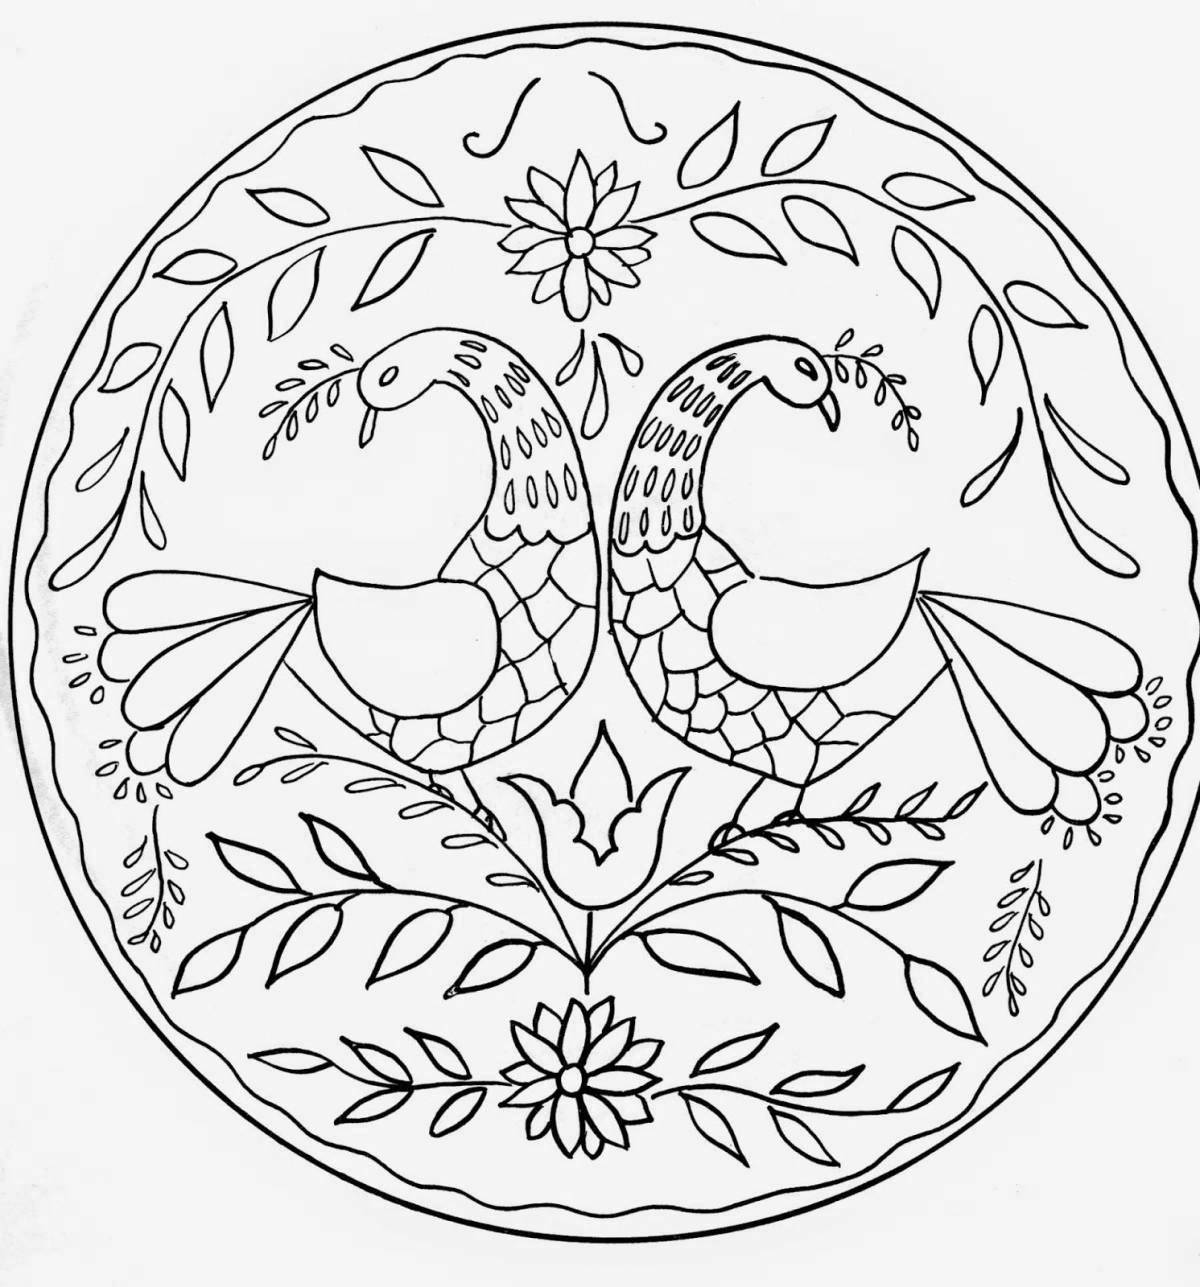 Amazing coloring book with Russian ornaments